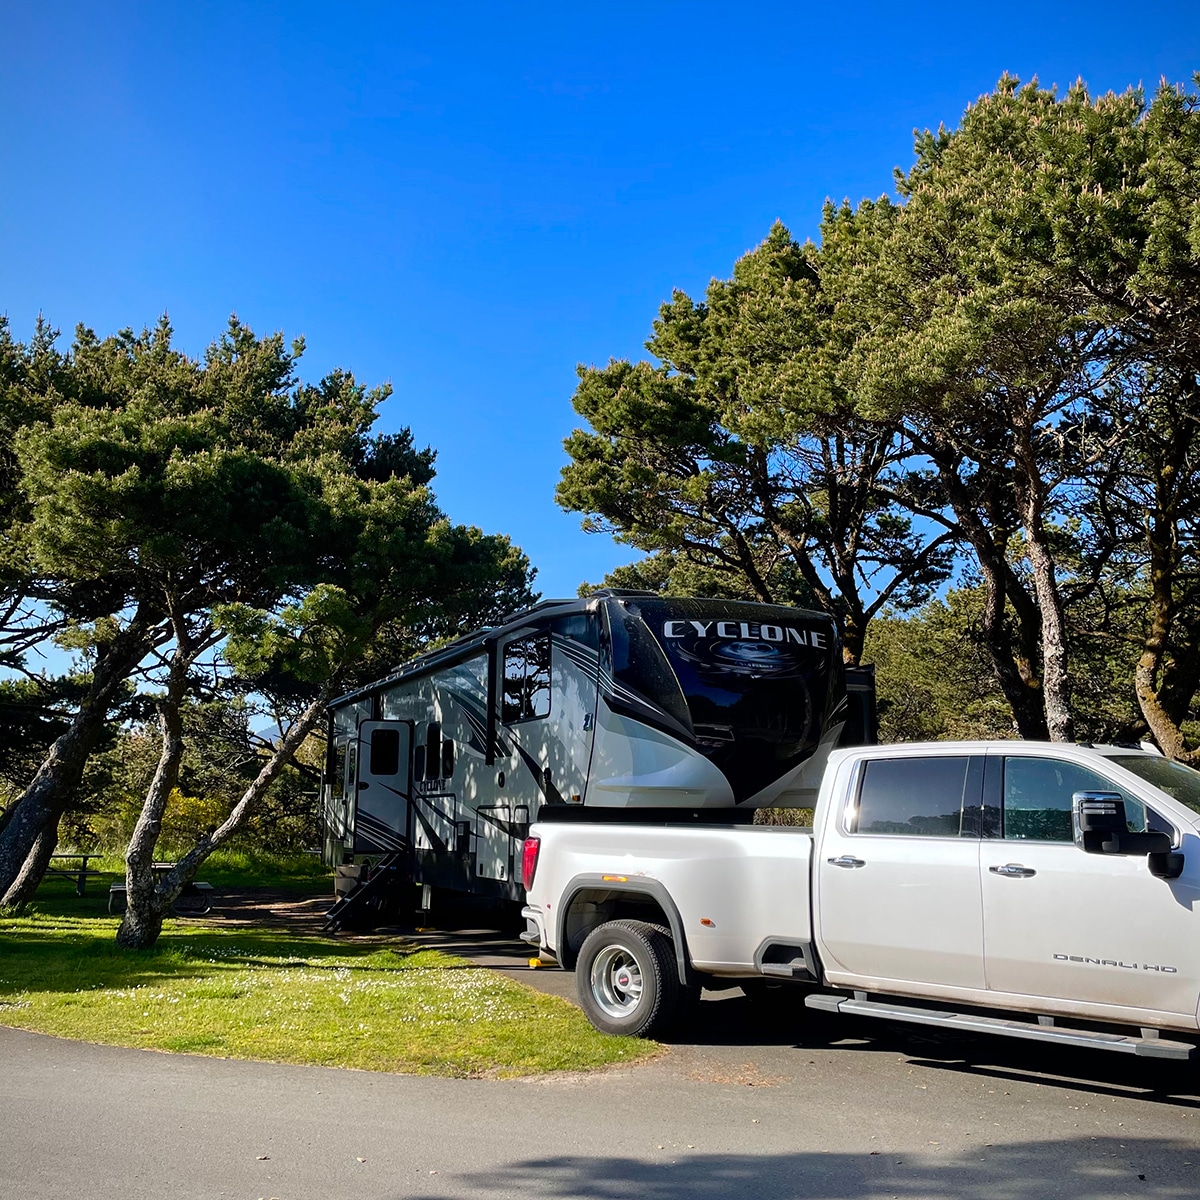 Our 5th wheel RV and truck parked in a space in Nehalem Bay State Park in Oregon.